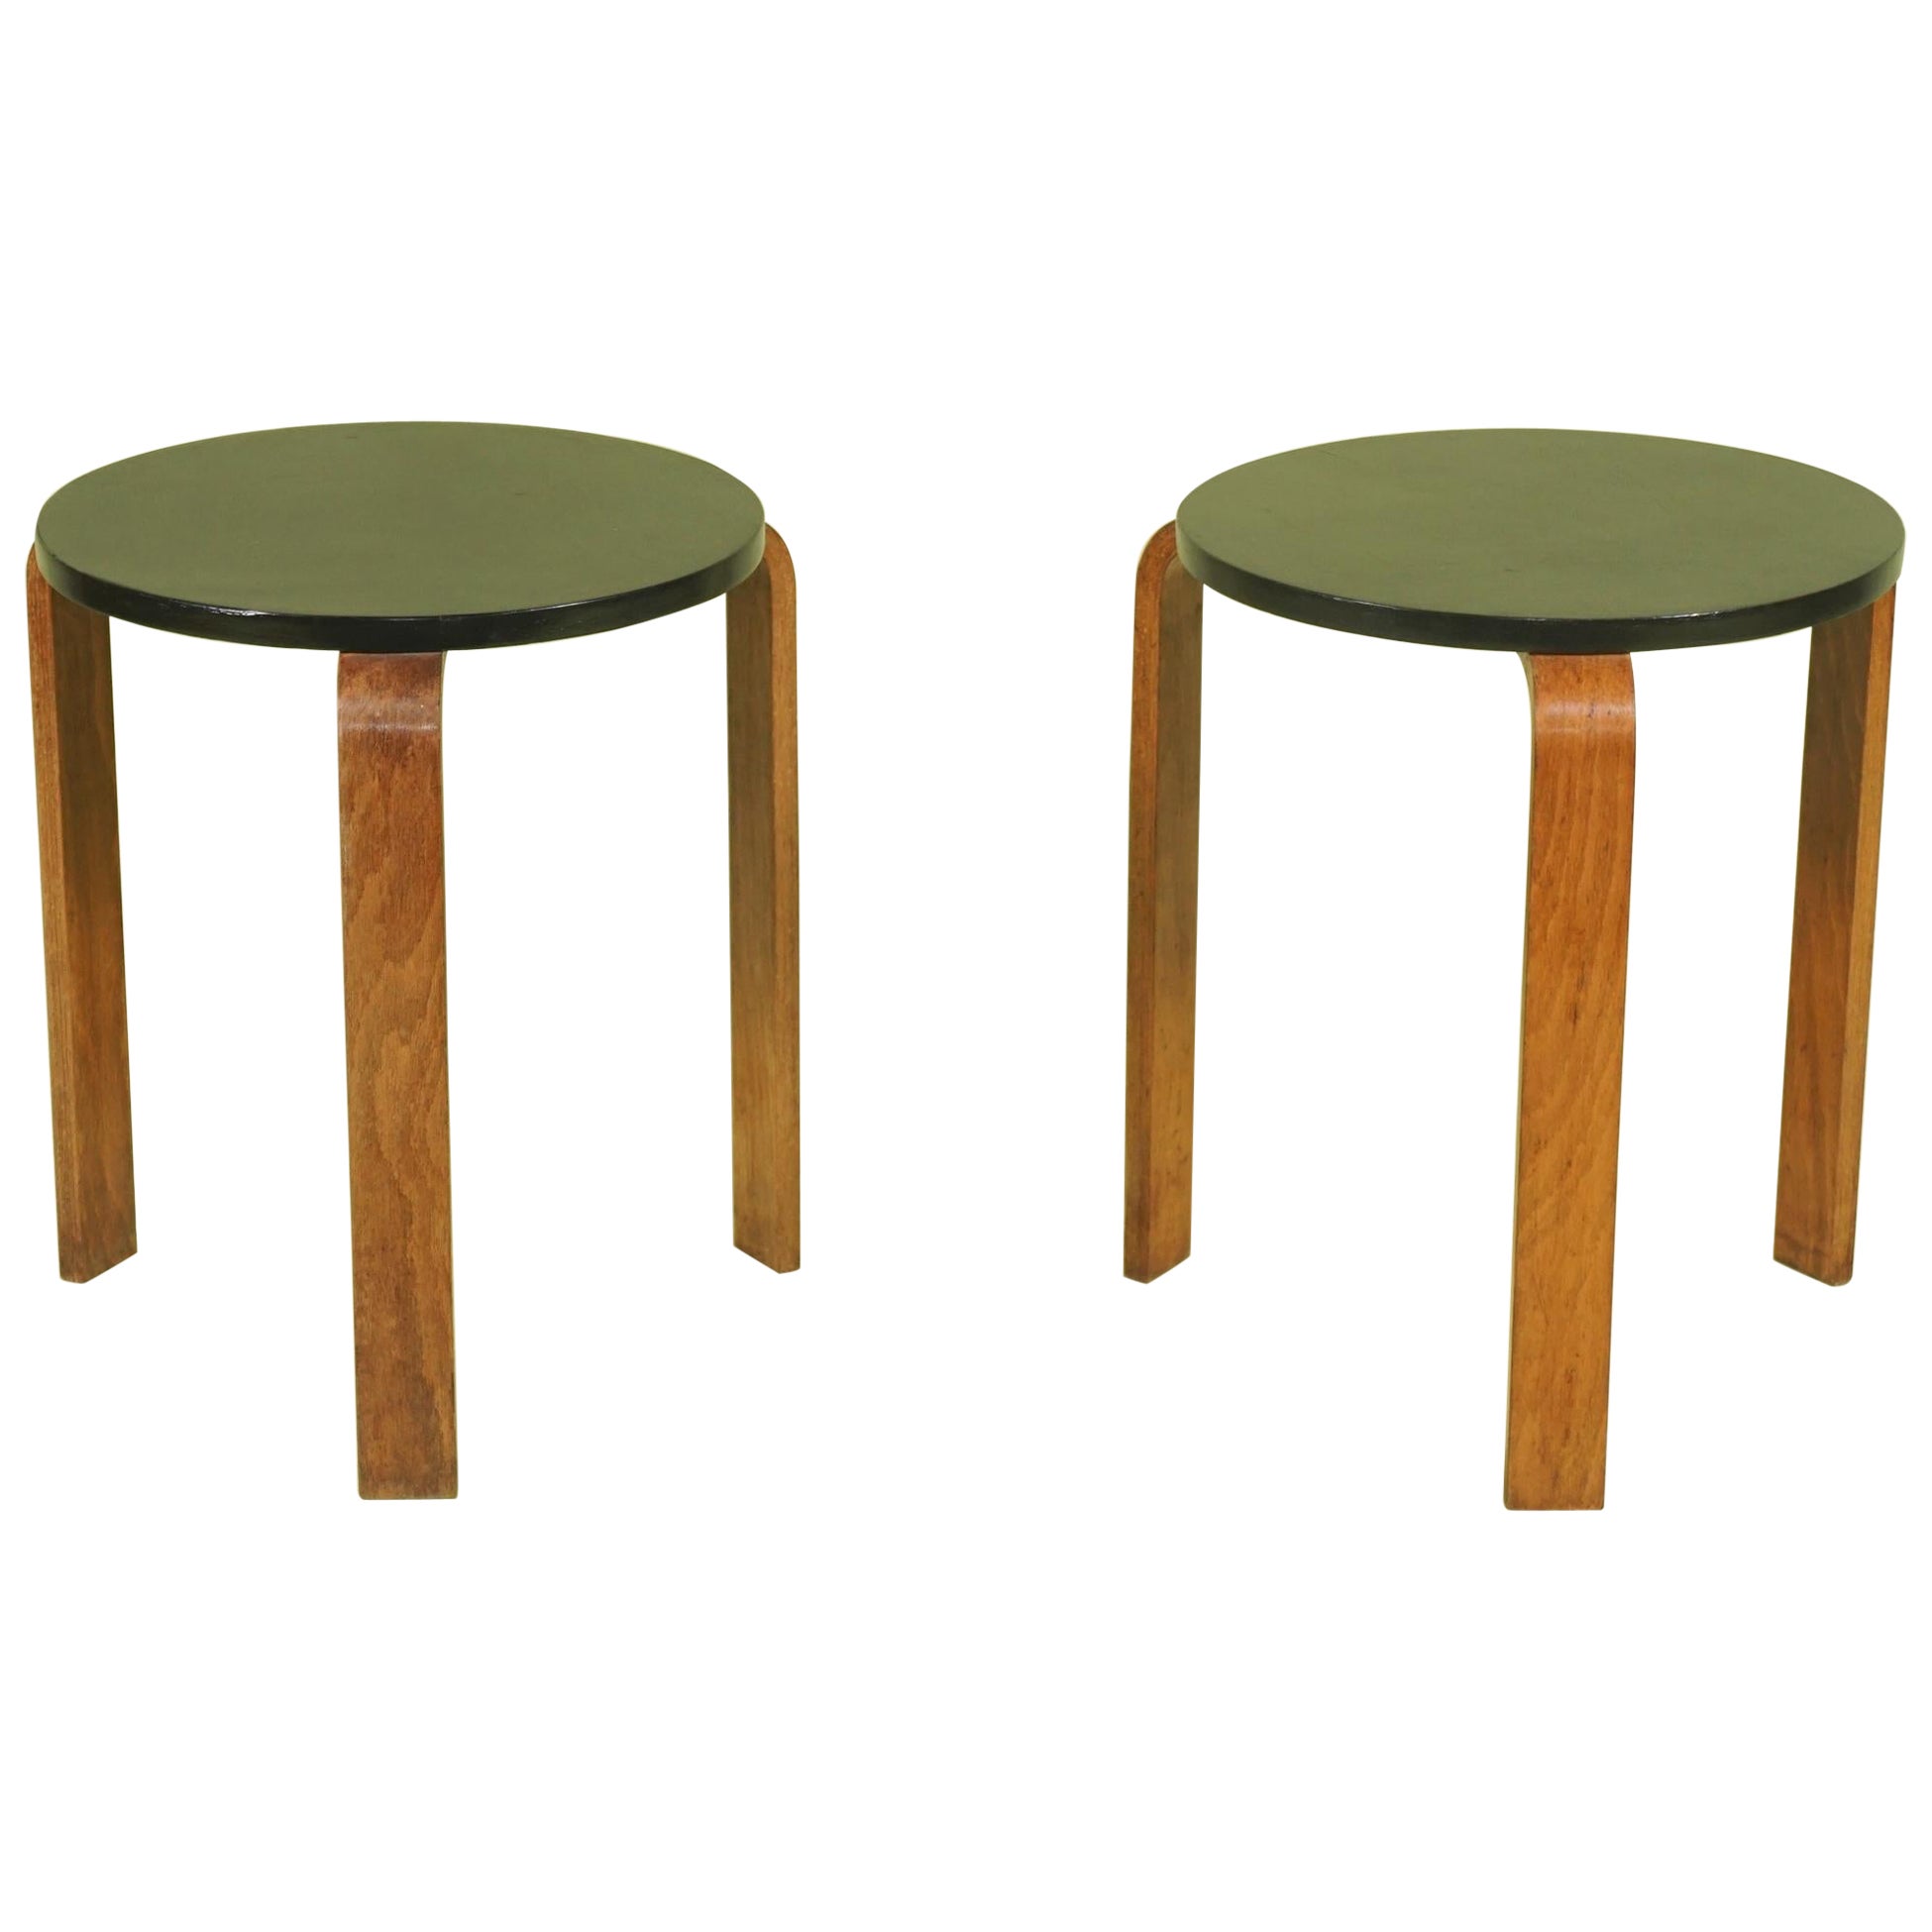 Pair of Vintage bentwood Low Tables or Stools After a Design by Alvar Aalto For Sale